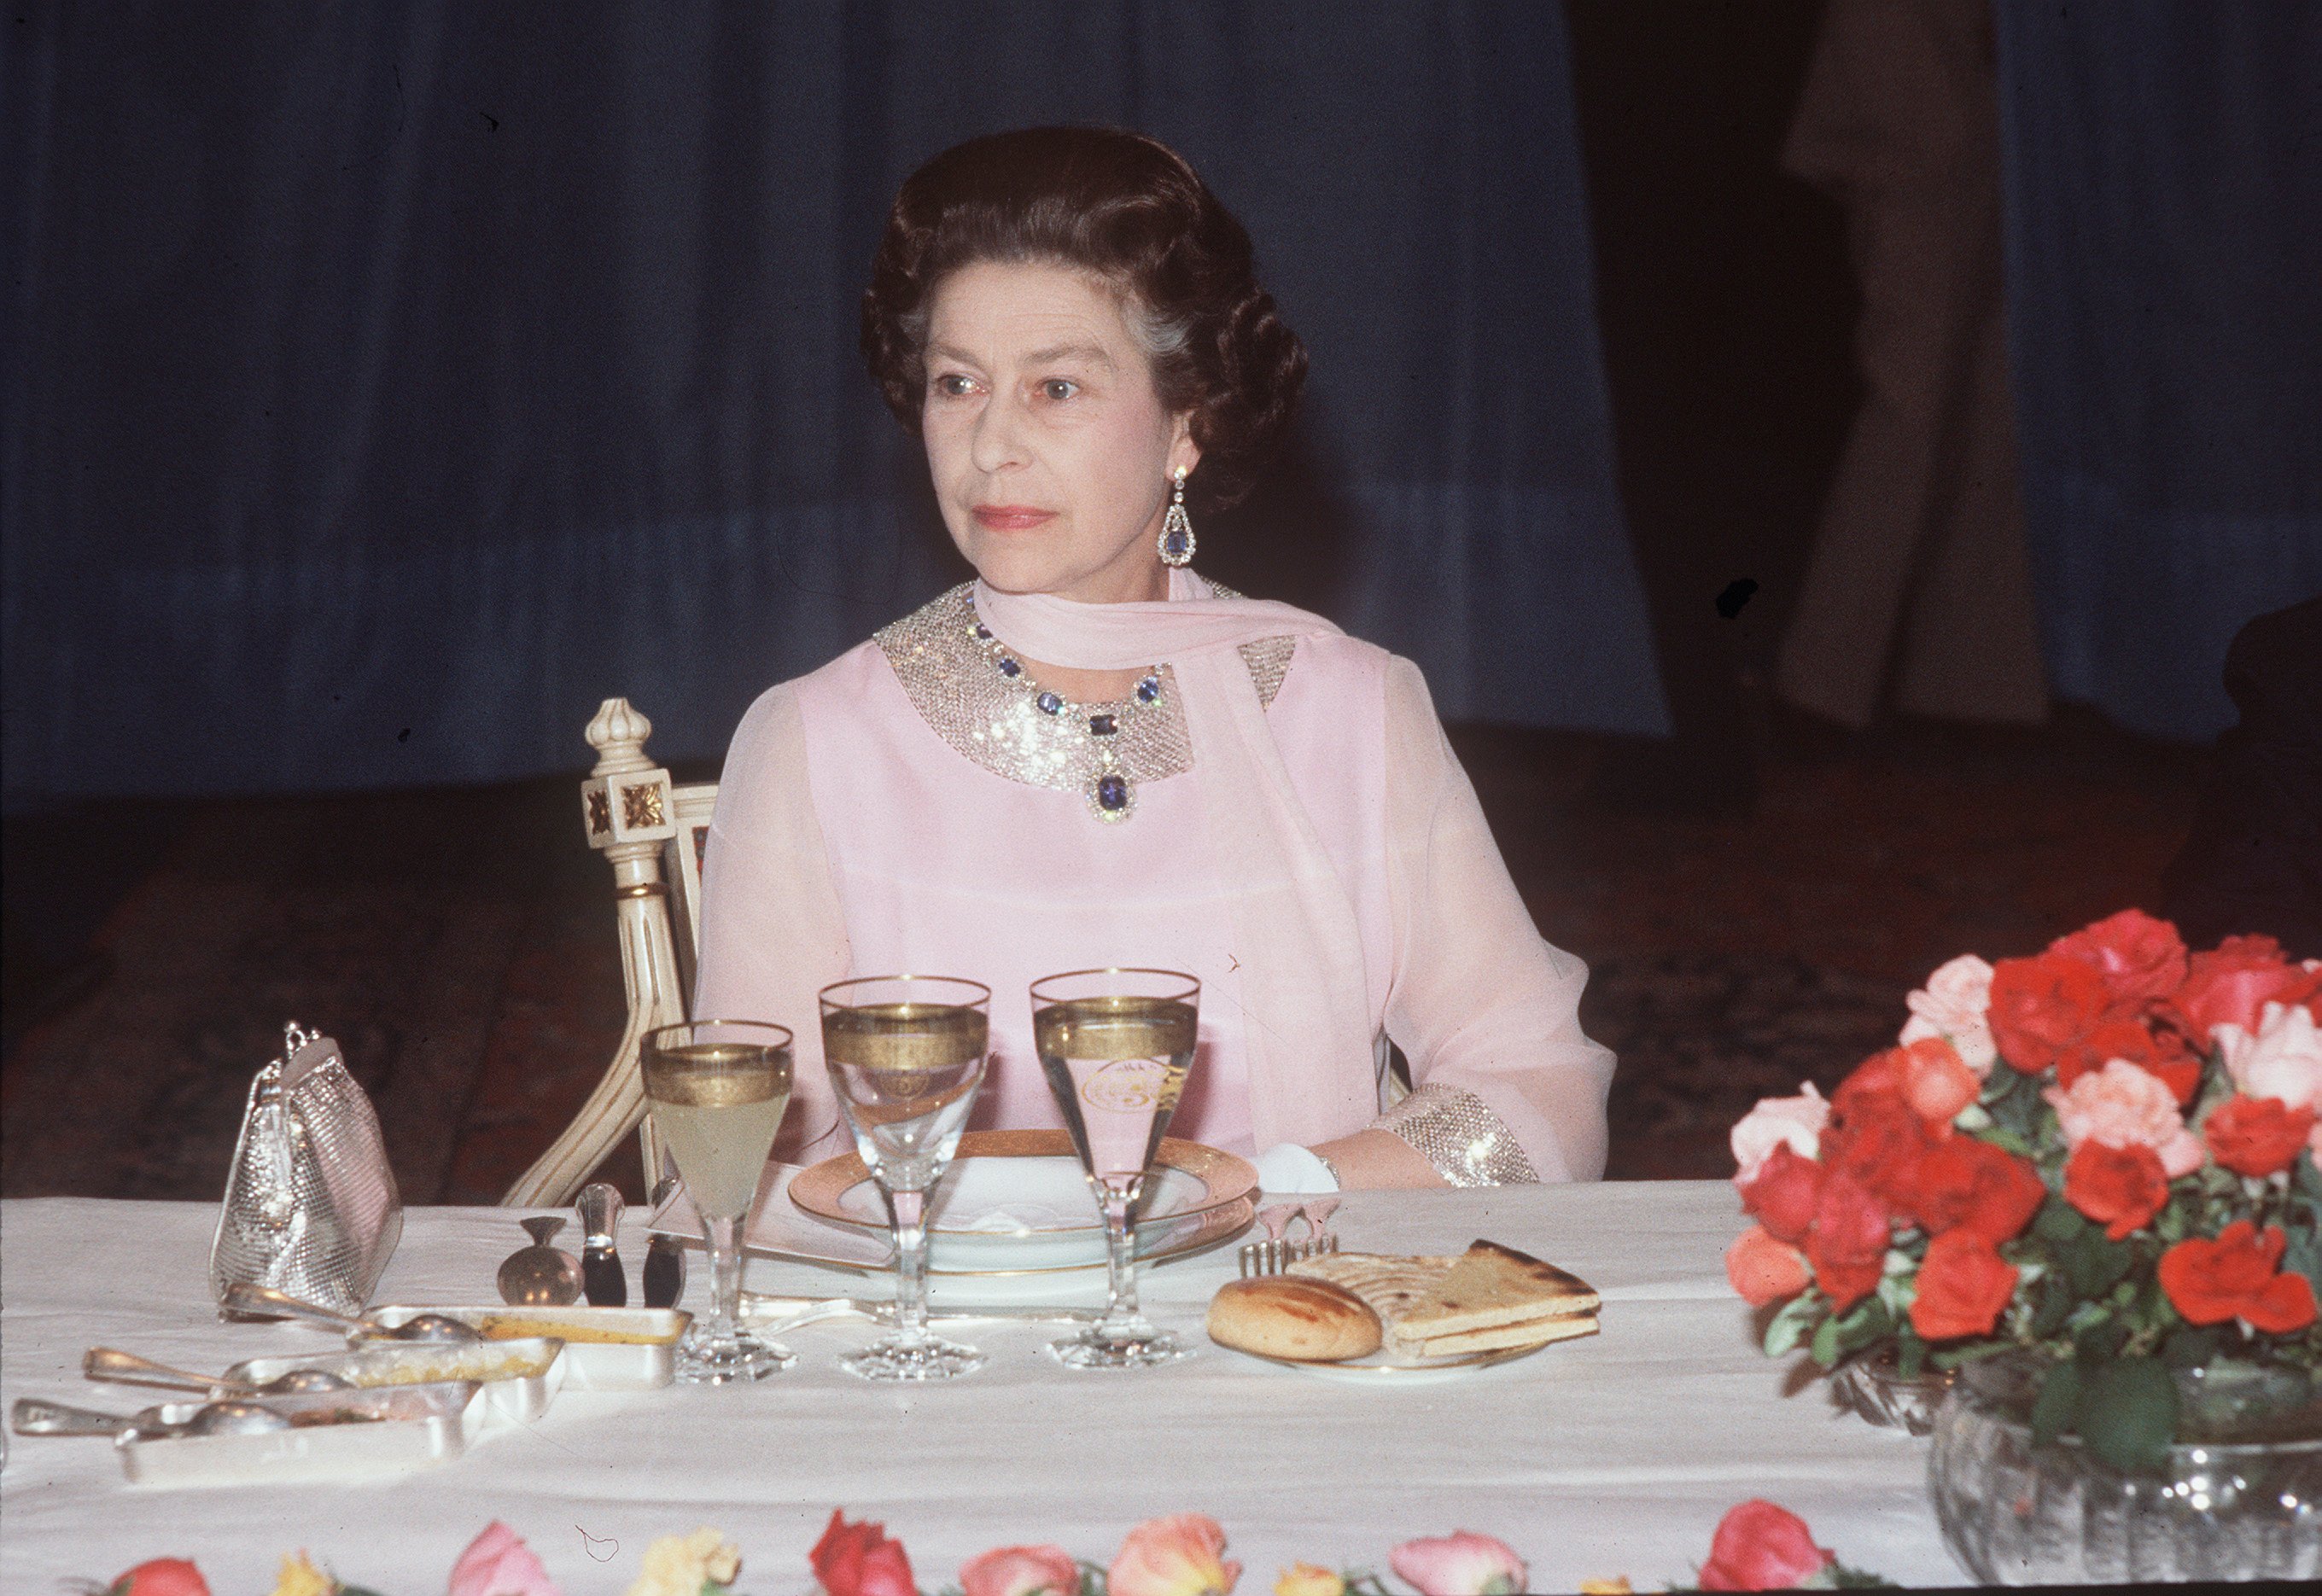 Queen Elizabeth ll seated at a State Banquet on October 25, 1980 in Algiers, Algeria